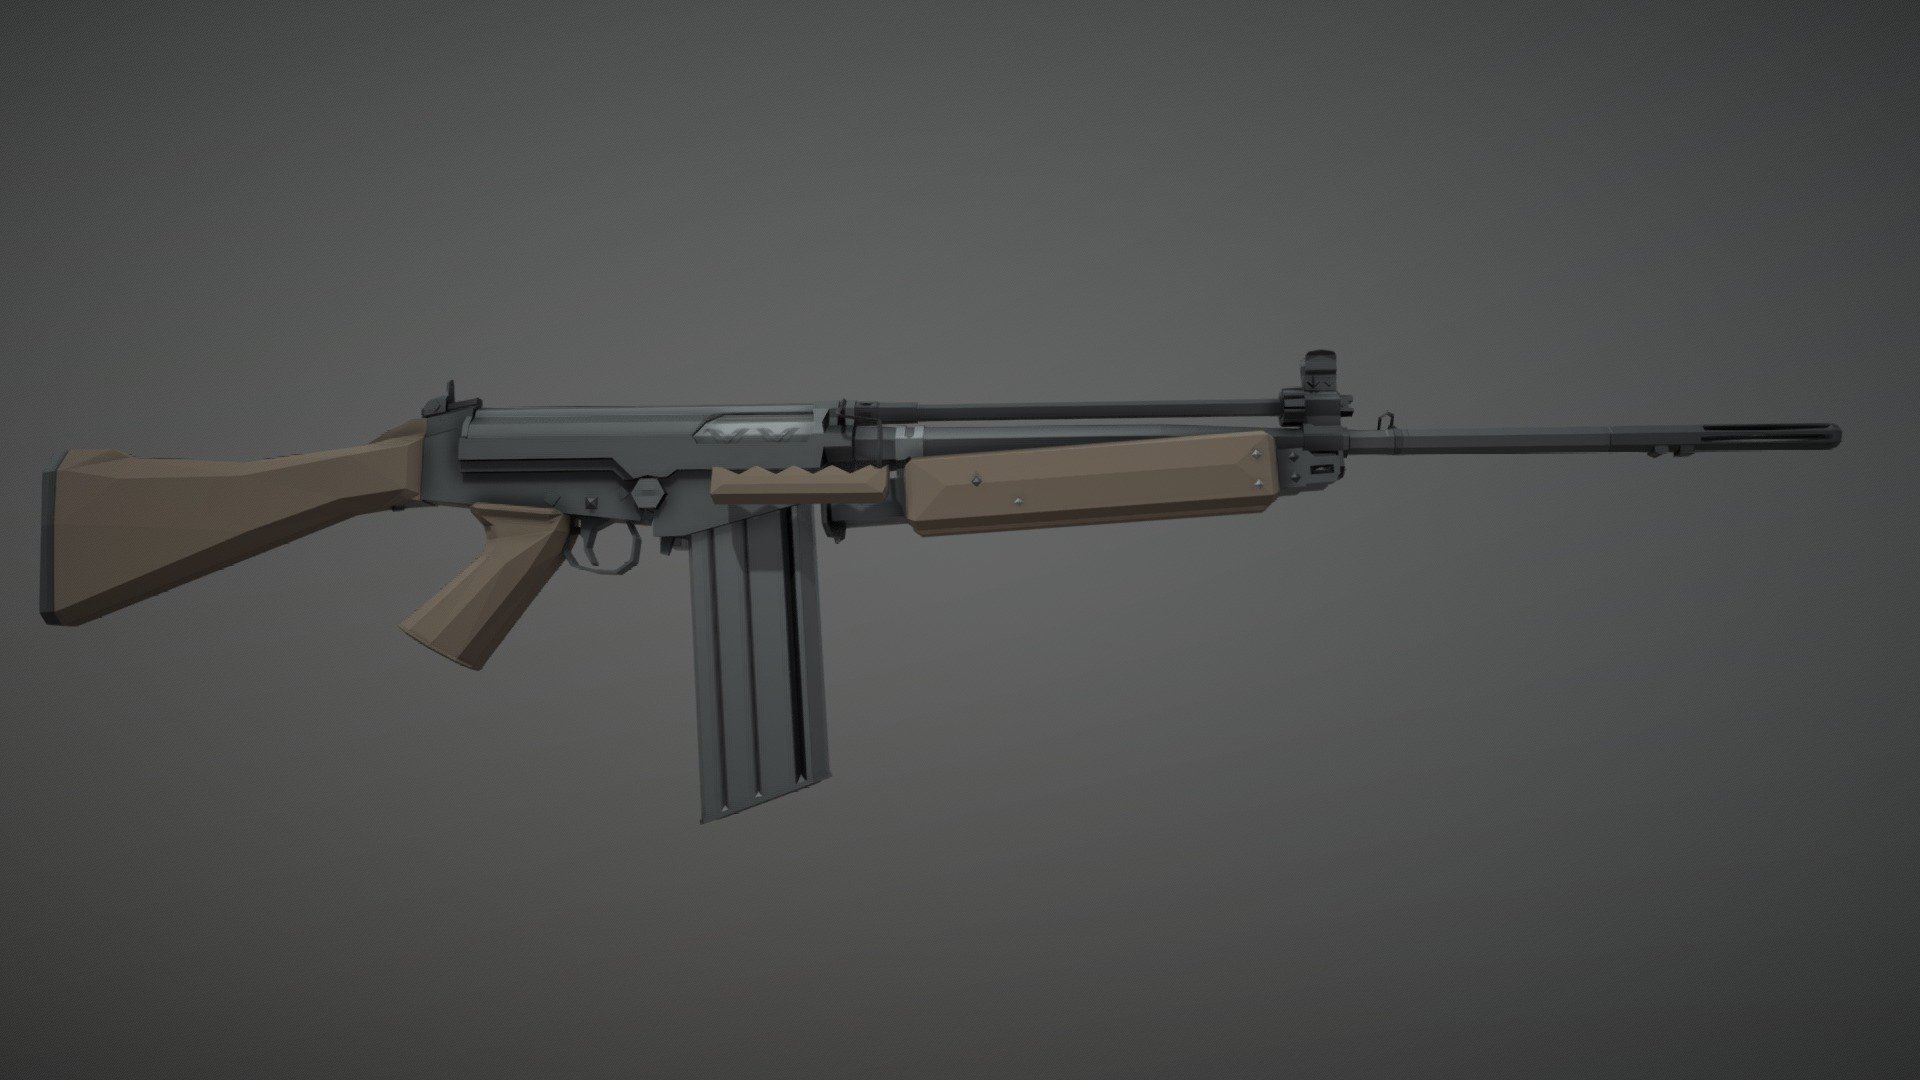 low-poly model of the Australian L2A1 Squad Automatic Rifle, a weapon based on the L1A1 SLR, but with a few changes such as a thicker barrel, a bipod, and a 30 round magazine as well as full auto capability, to make it function as a machinegun/squad automatic weapon, similar to the russian RPK rifles 3d model